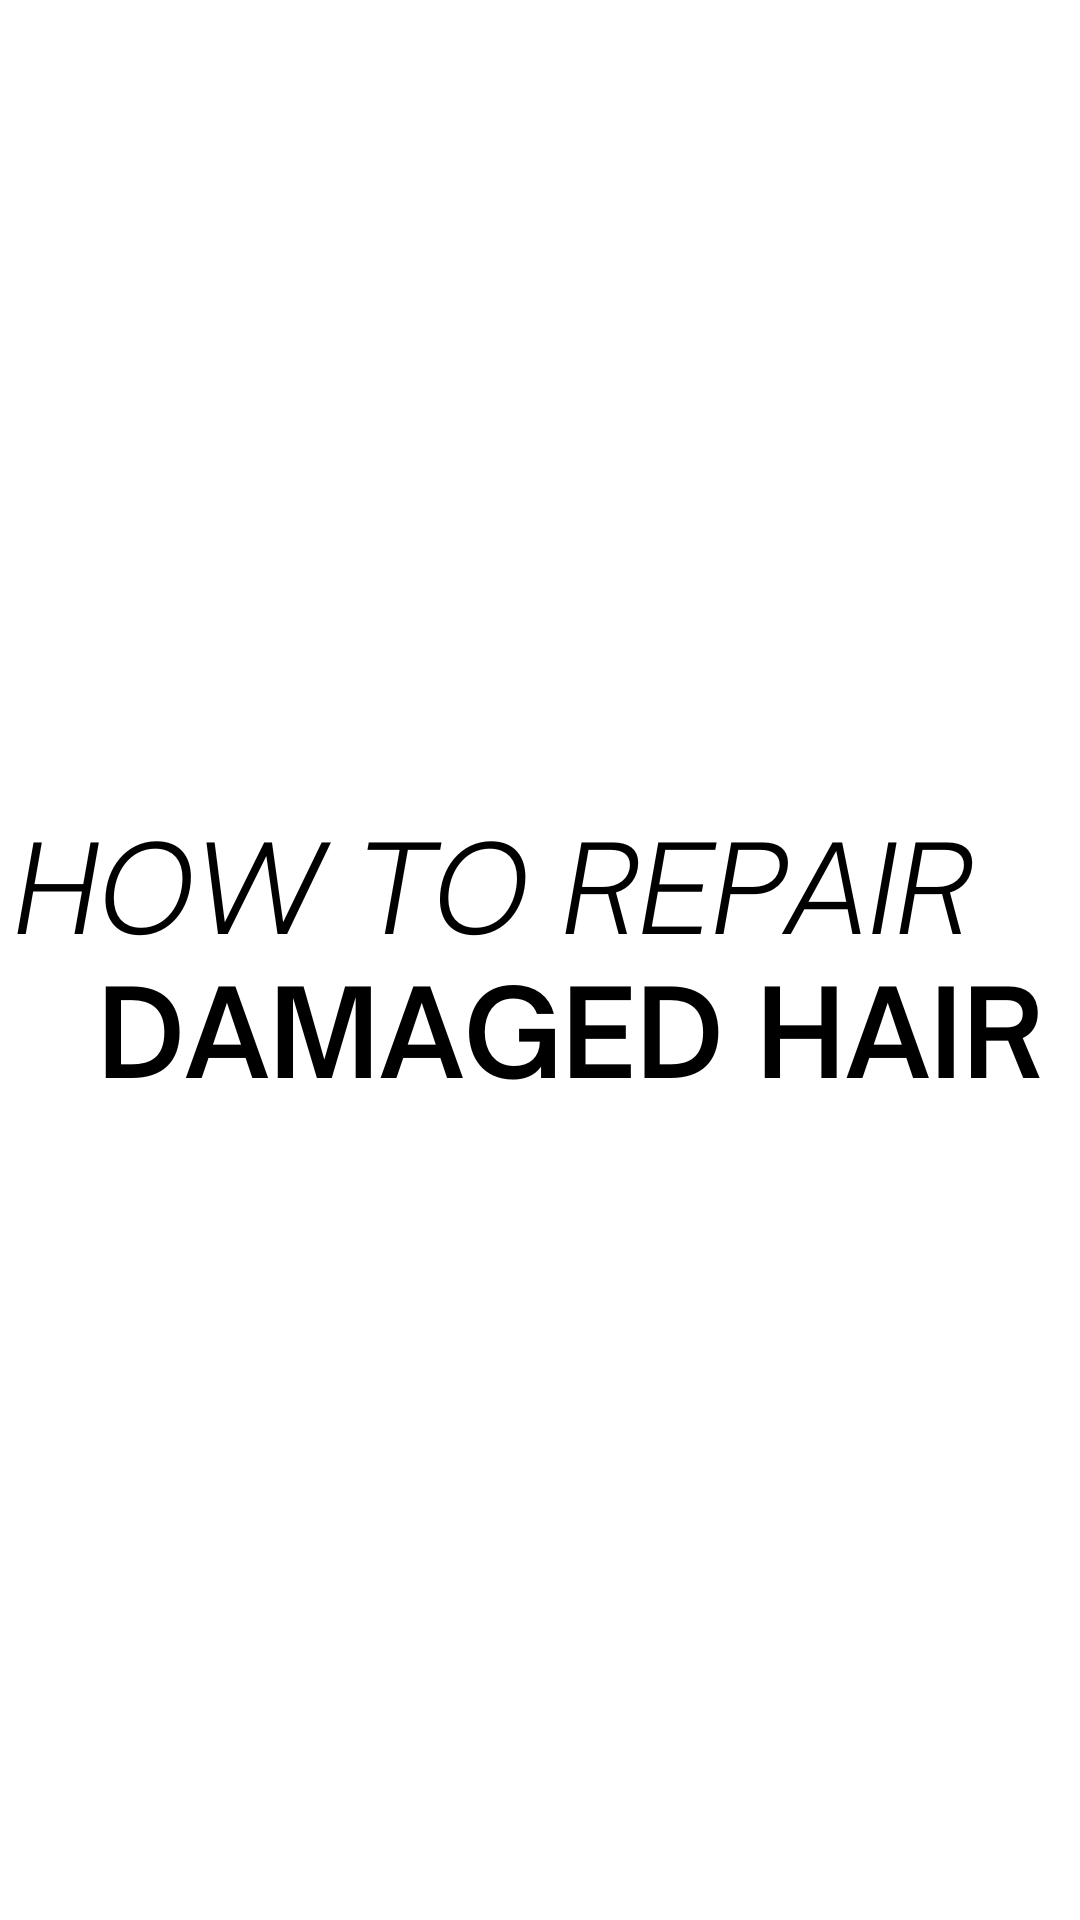 What causes hair breakage and how to repair damaged hair?